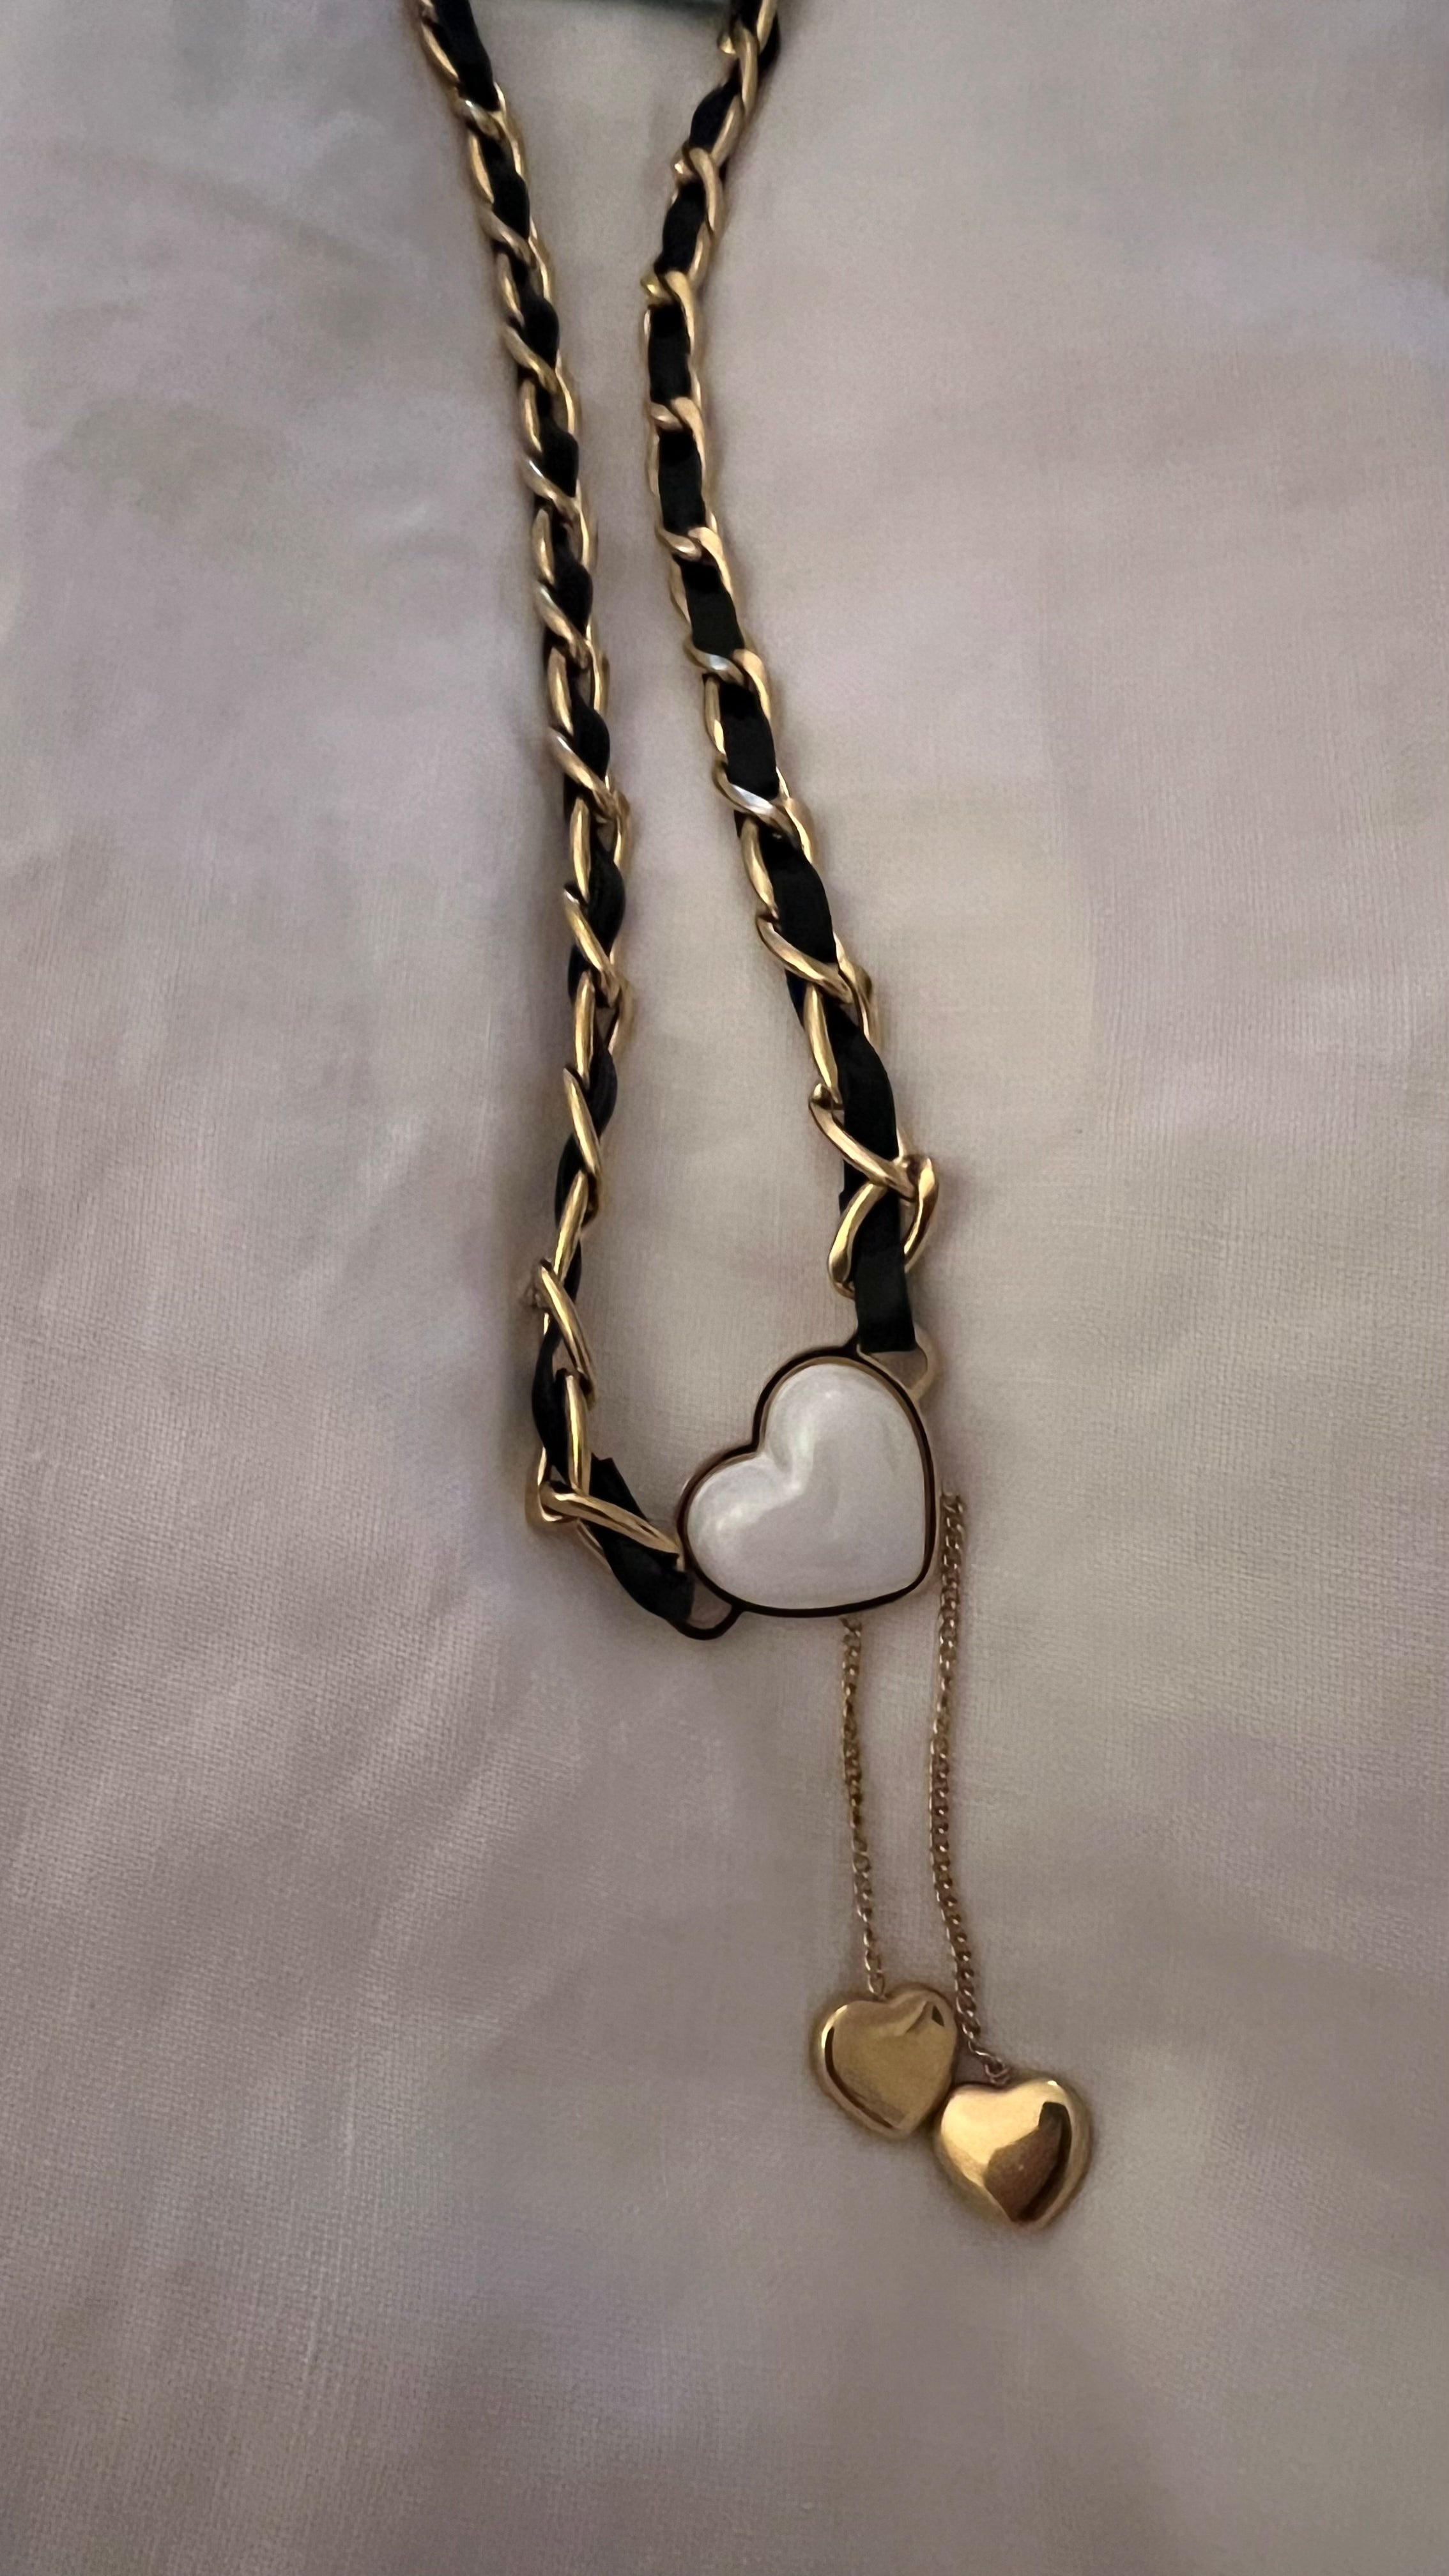 Necklace black gold plated heart white nacar and gold plated hearts